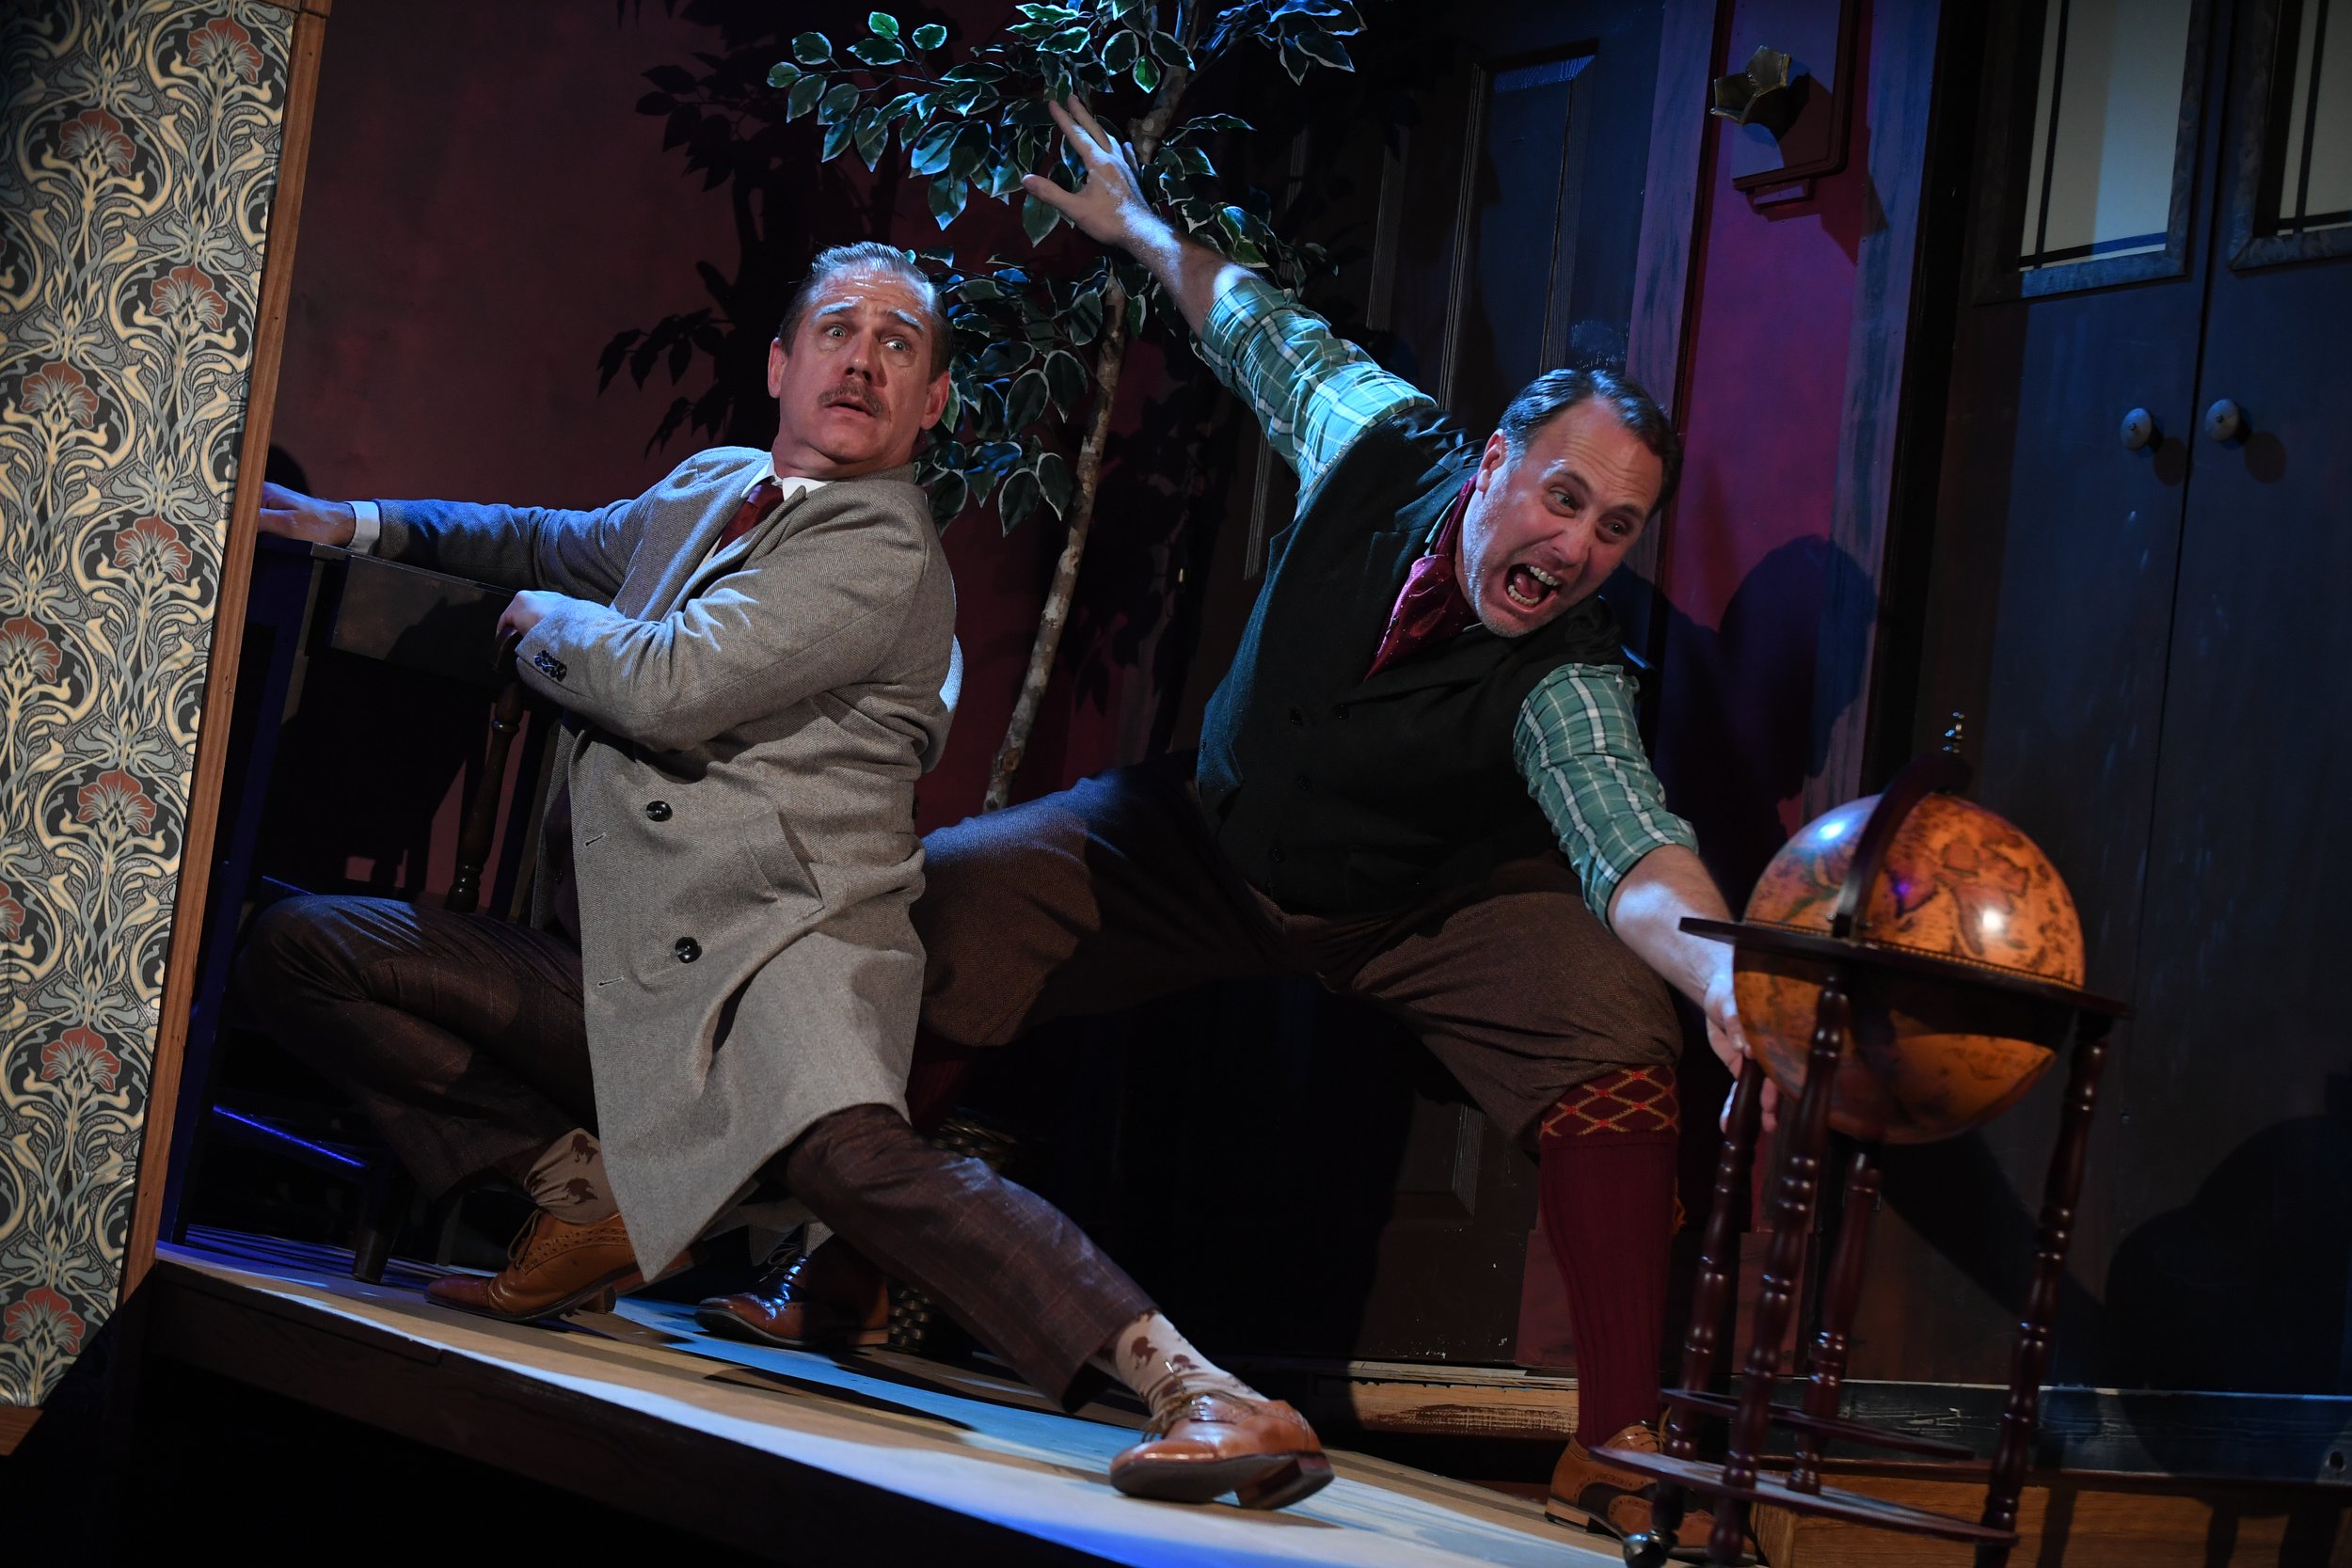    JONATHAN RHYS WILLIAMS (left) and WILL SPRINGHORN JR.* (right)      Credit: Dave Lepori      Photos for&nbsp;San Jose Stage Company’s production of THE PLAY THAT GOES&nbsp; WRONG by HENRY LEWIS, JONATHAN SAYER &amp; HENRY SHIELDS. Directed by KENN